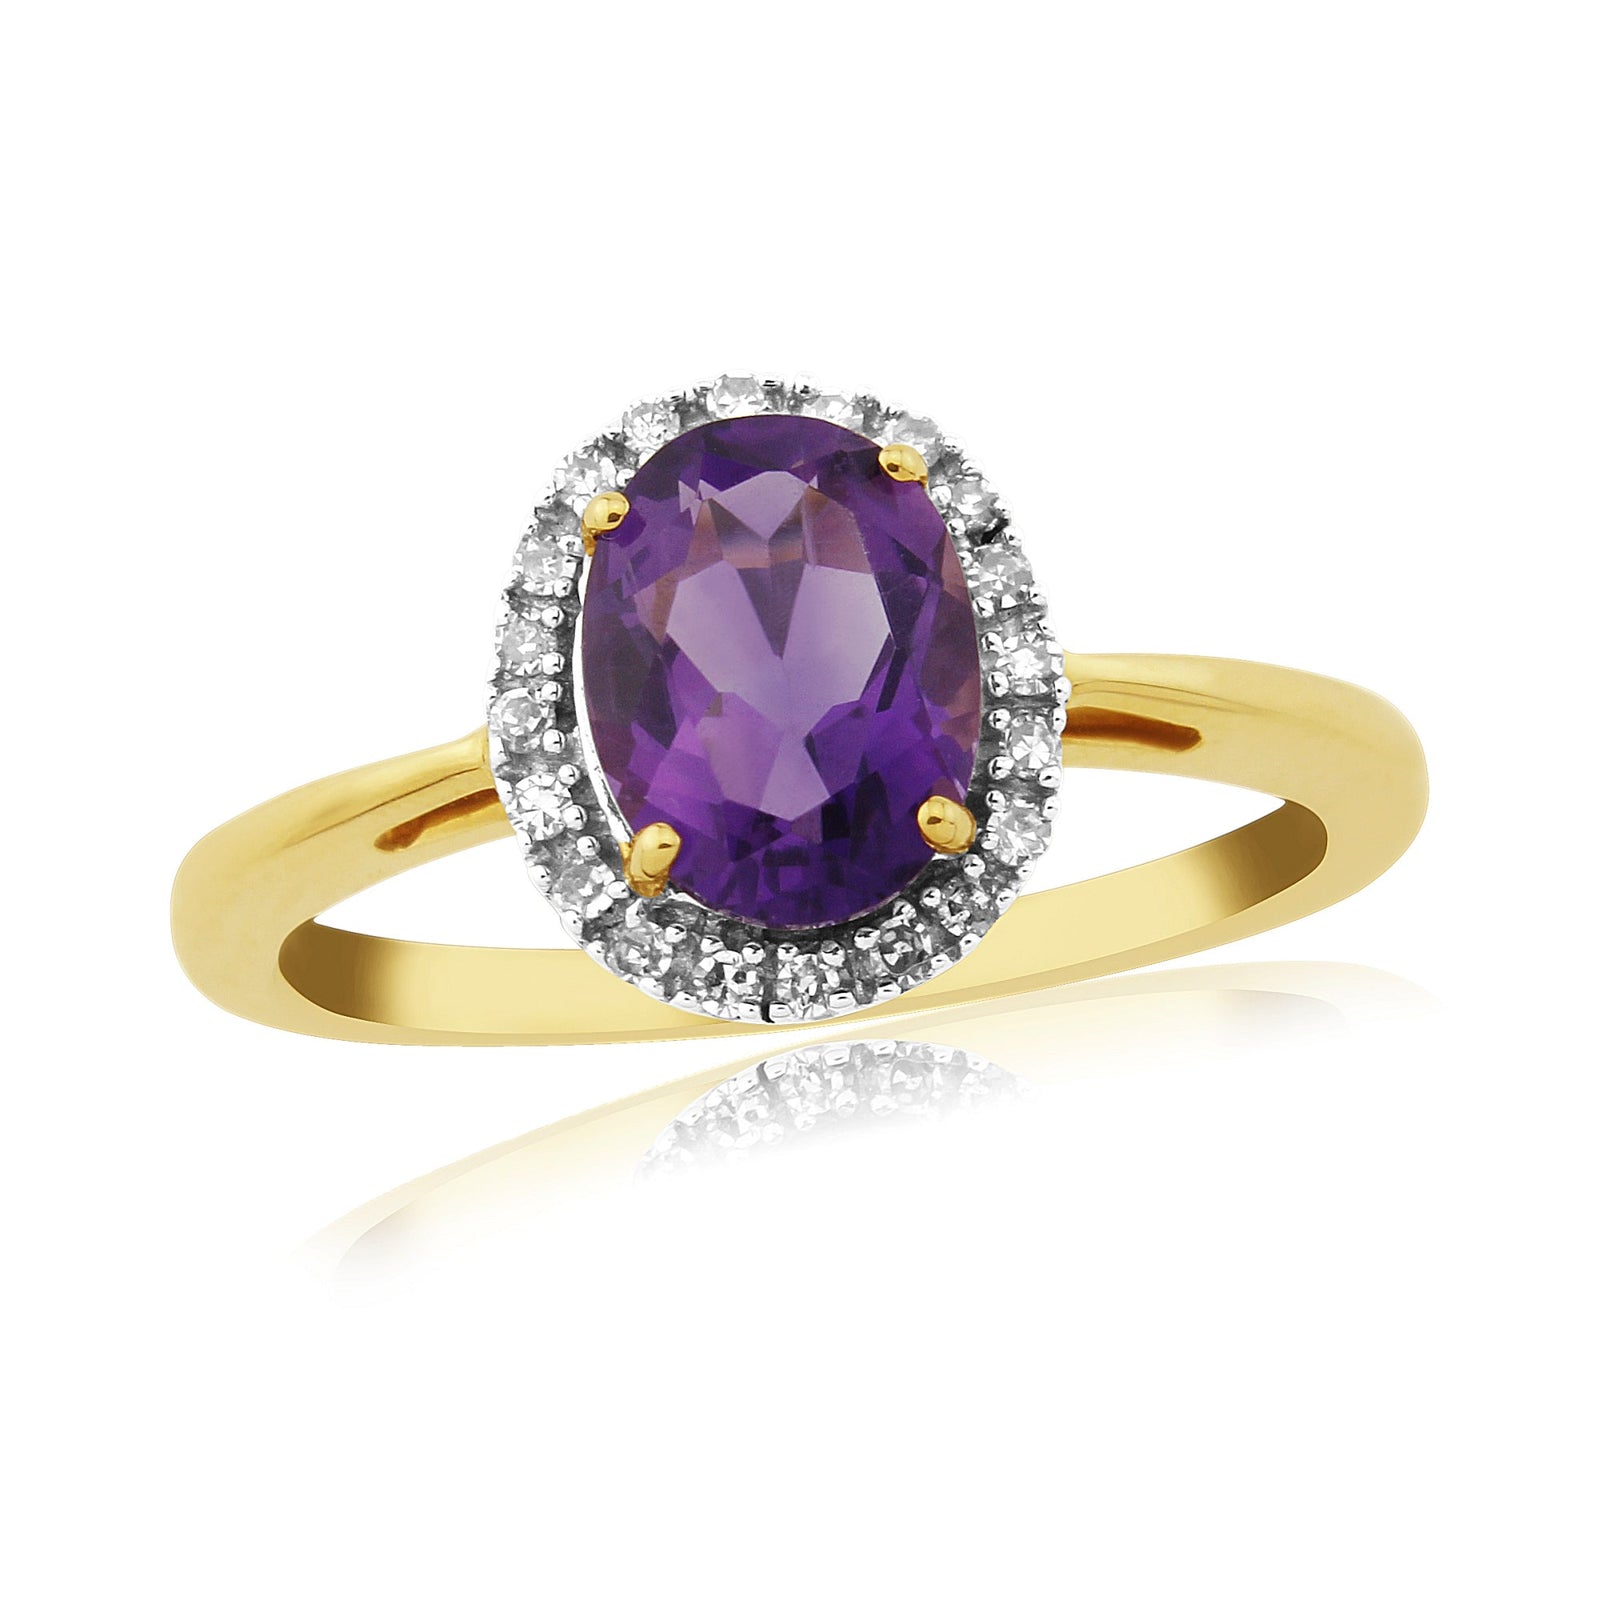 9ct gold 8x6mm oval amethyst & diamond cluster ring 0.08ct